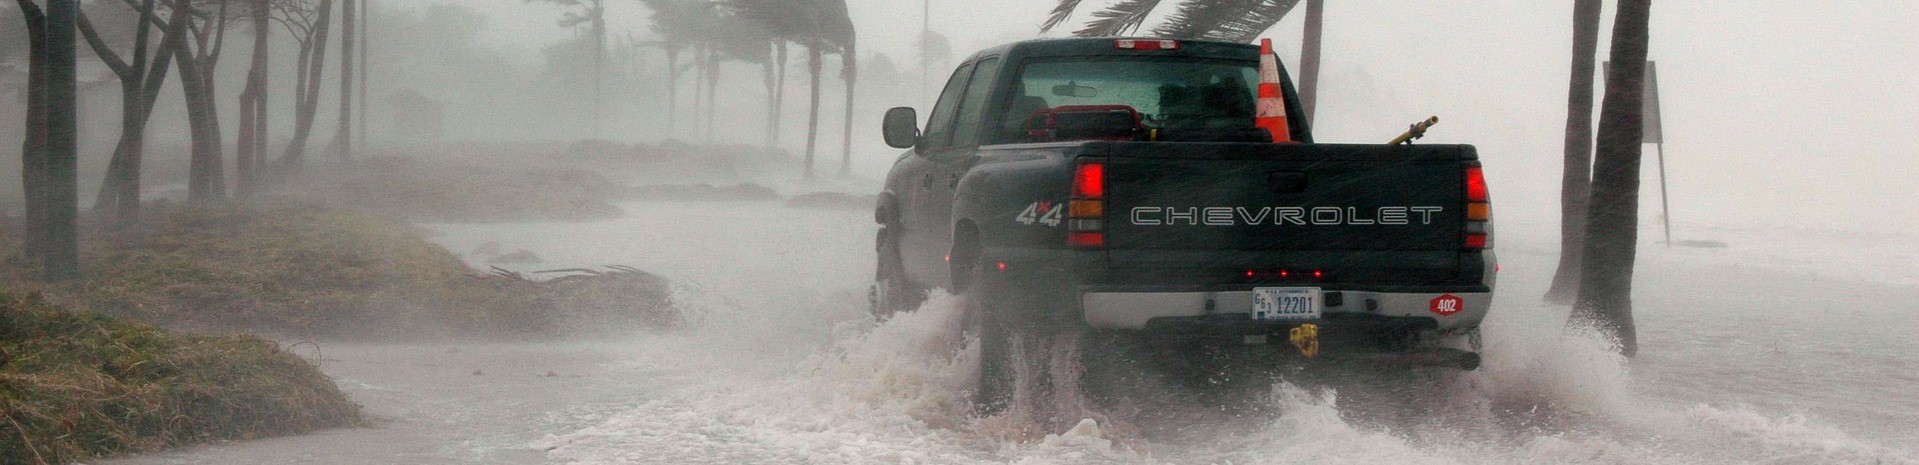 Pick-Up Truck on a Flooded Street - CarDonations4Cancer.org